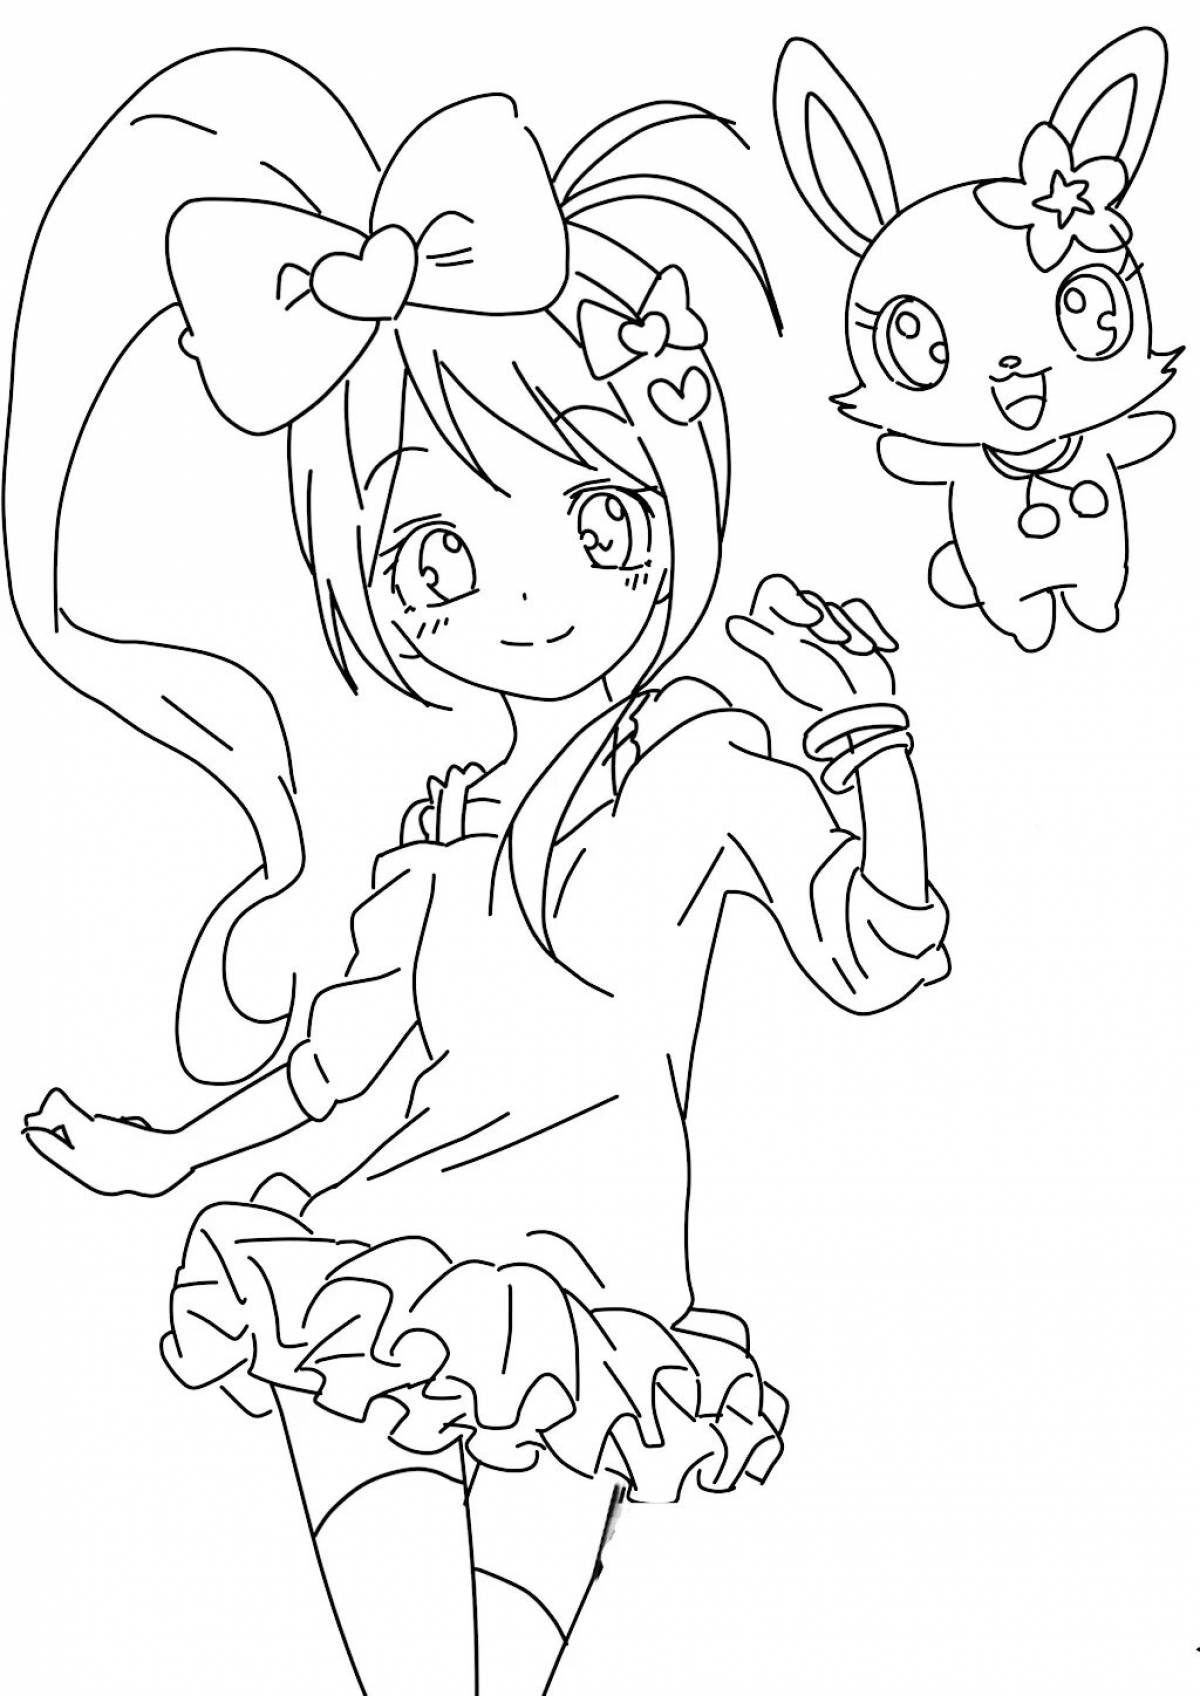 Coloring book naughty anime rabbit